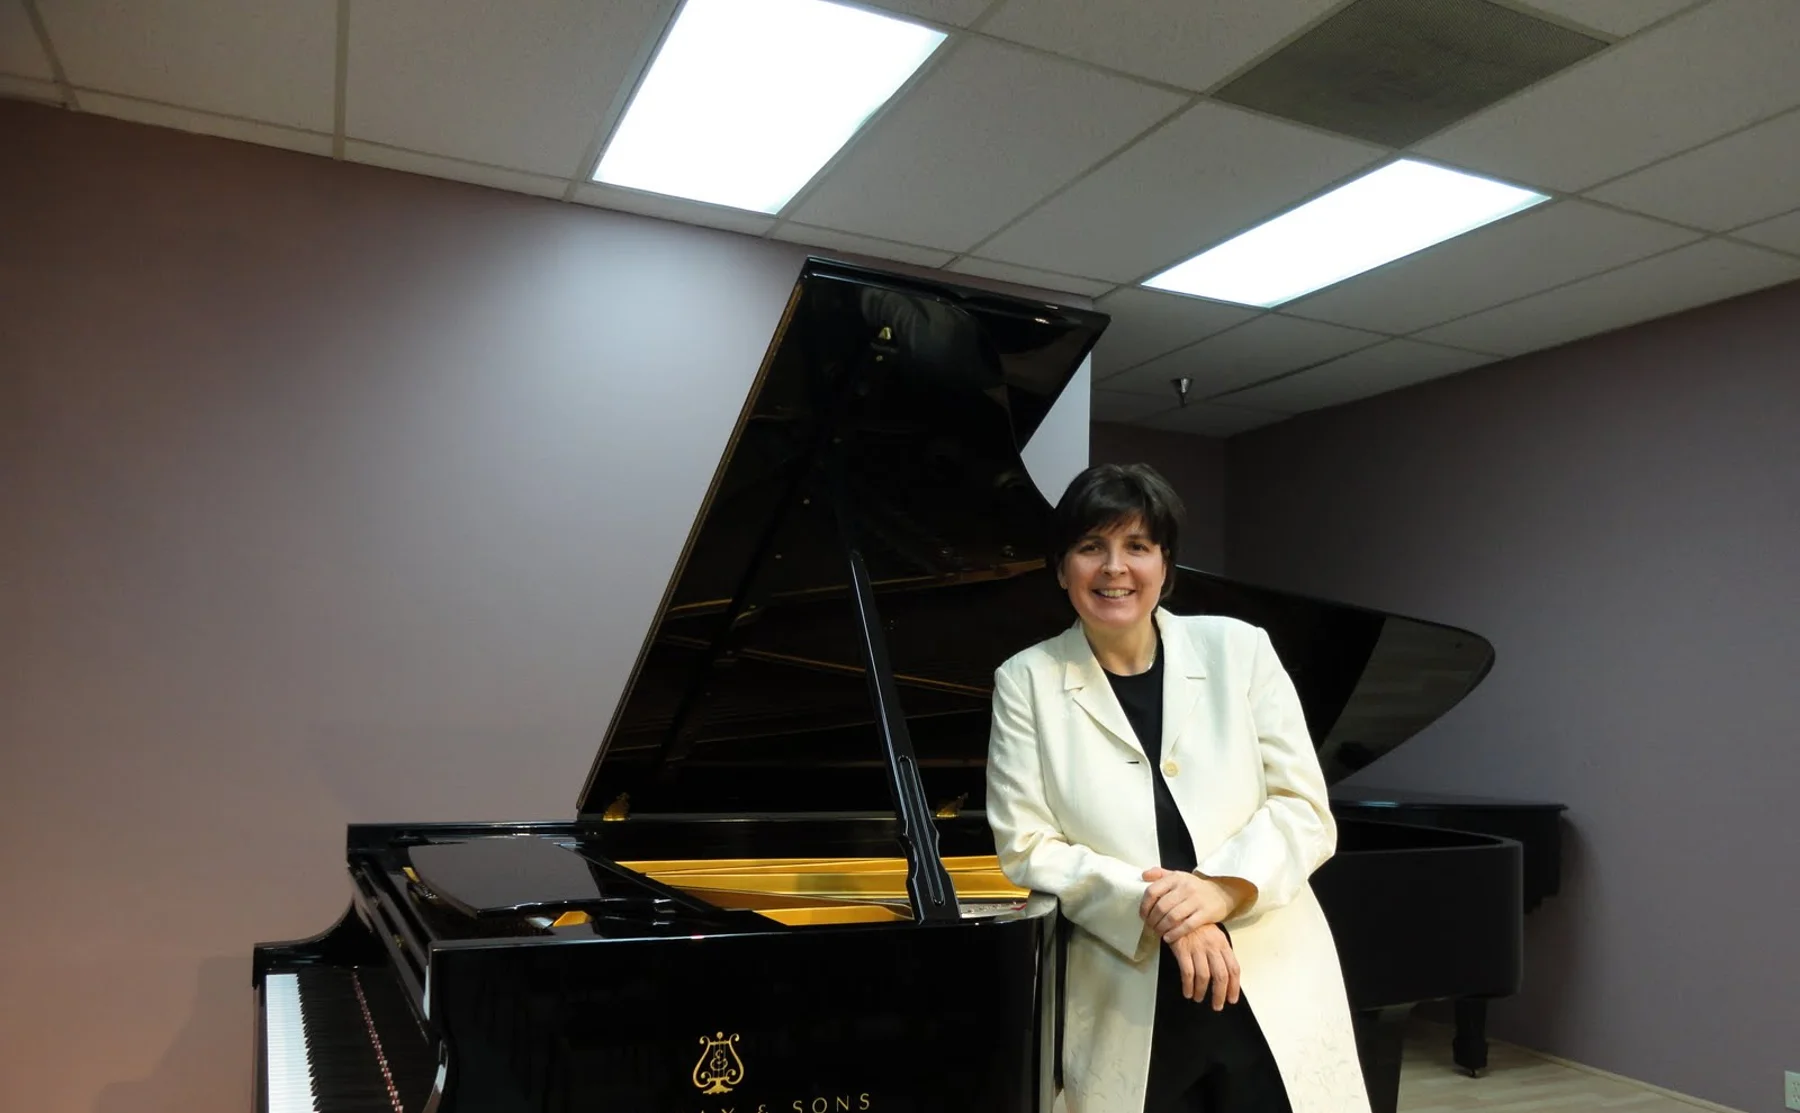 French Cuisine & Live Piano Concert at Chez Sandrine! - 1443672